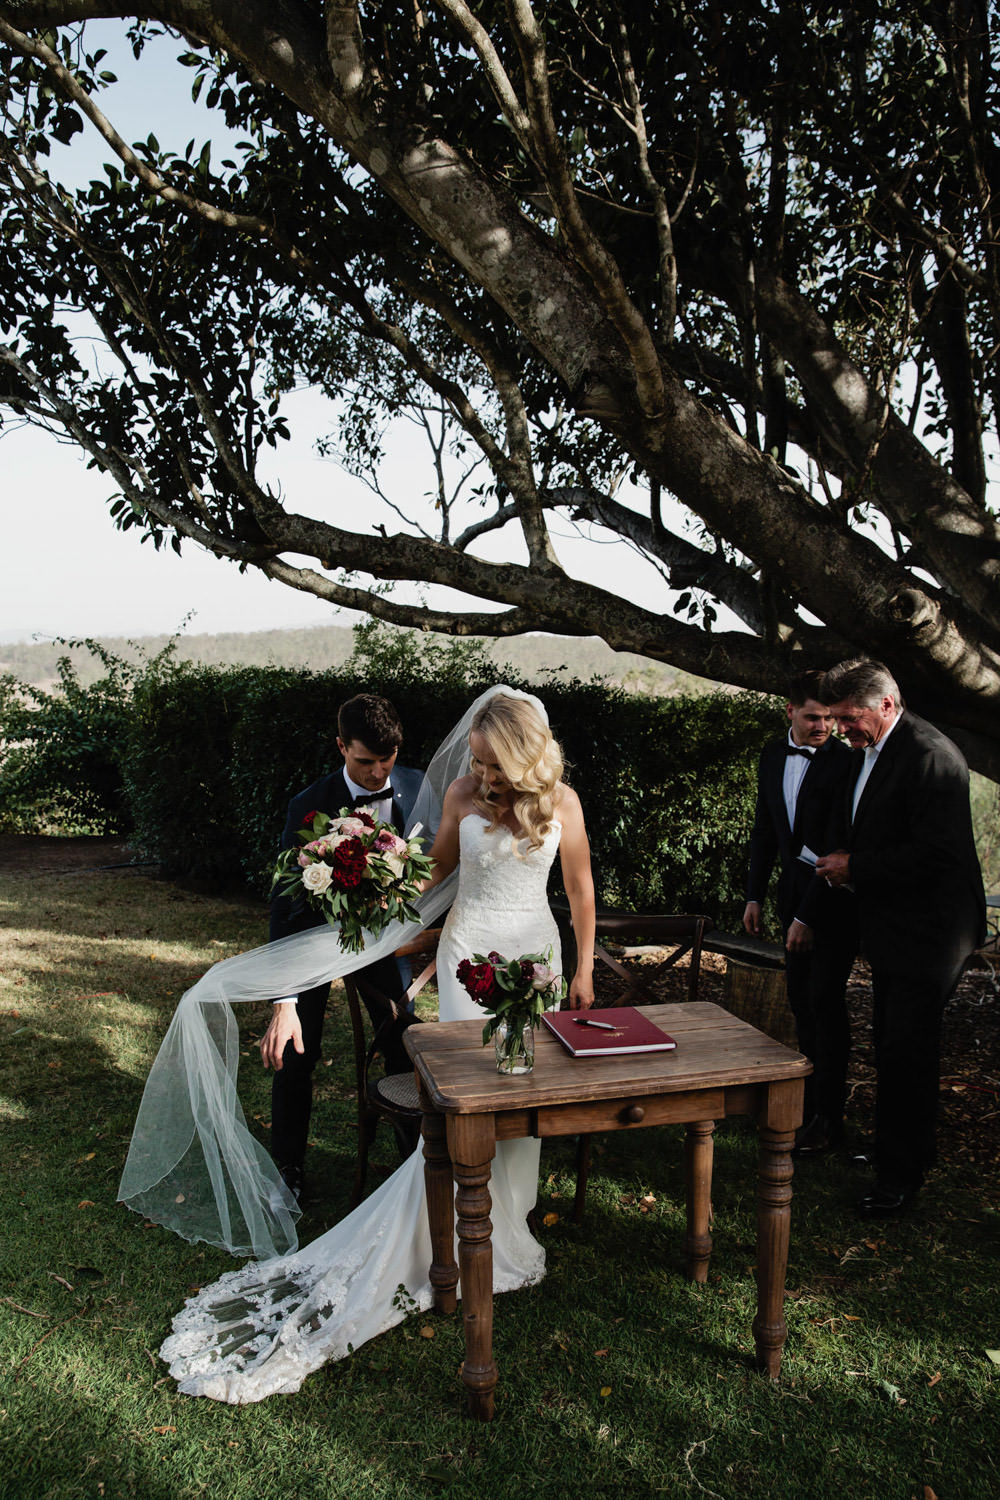 veil flying-ceremony-signing-natural, fun, romantic-wedding-photography at Spicers-hiddenvale-QuinceandMulberryStudios